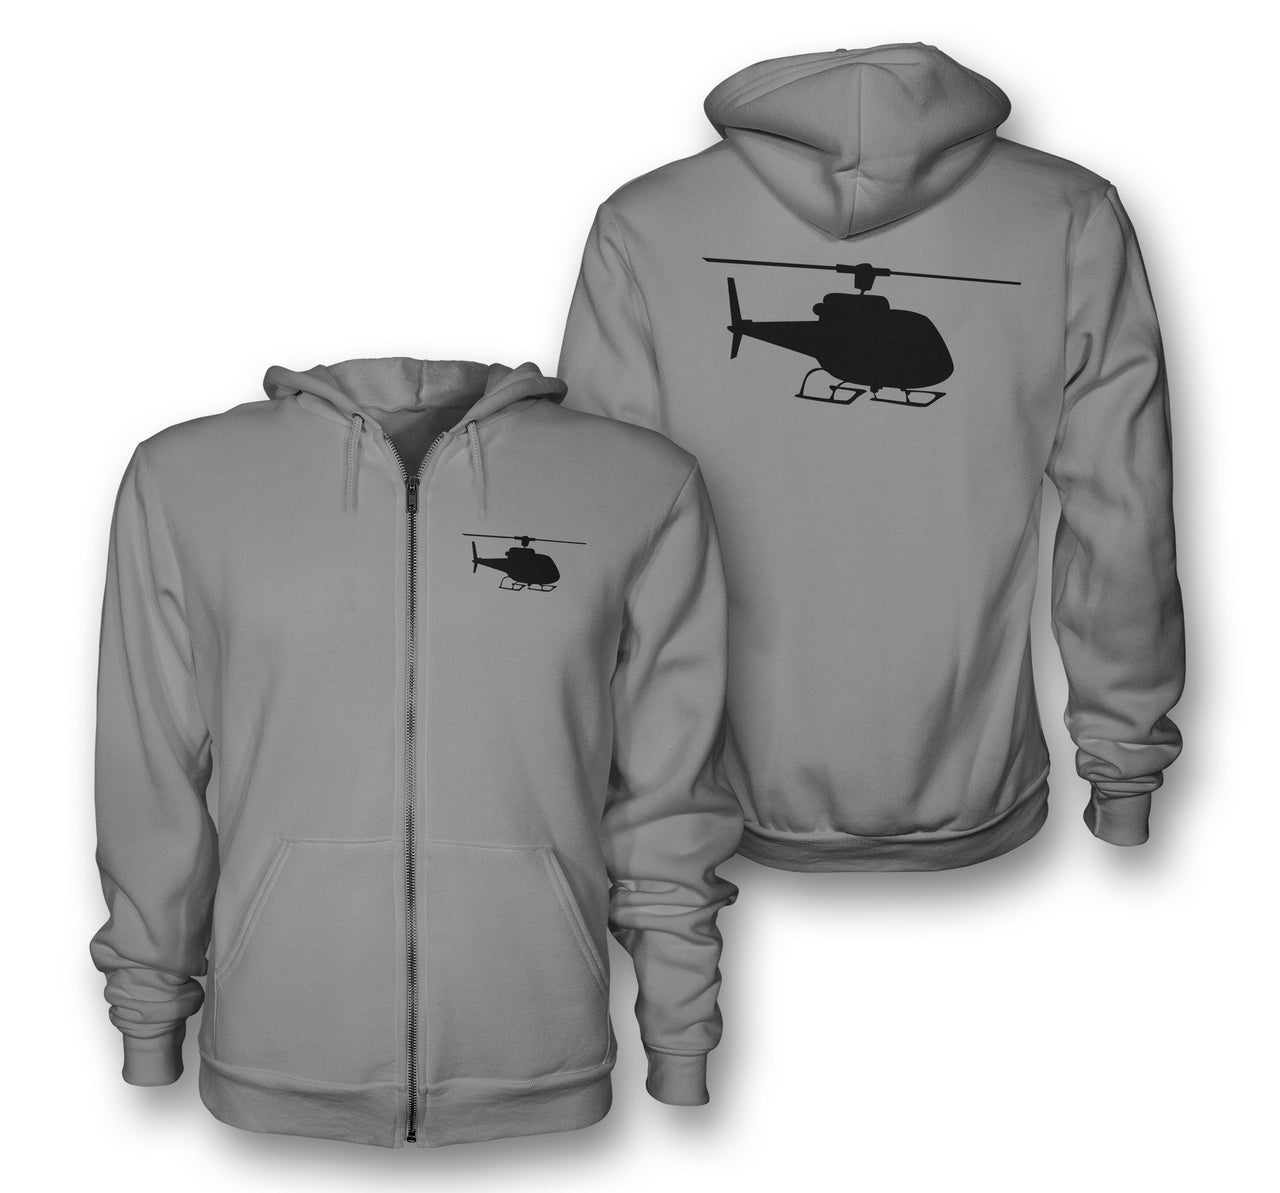 Helicopter Silhouette Designed Zipped Hoodies